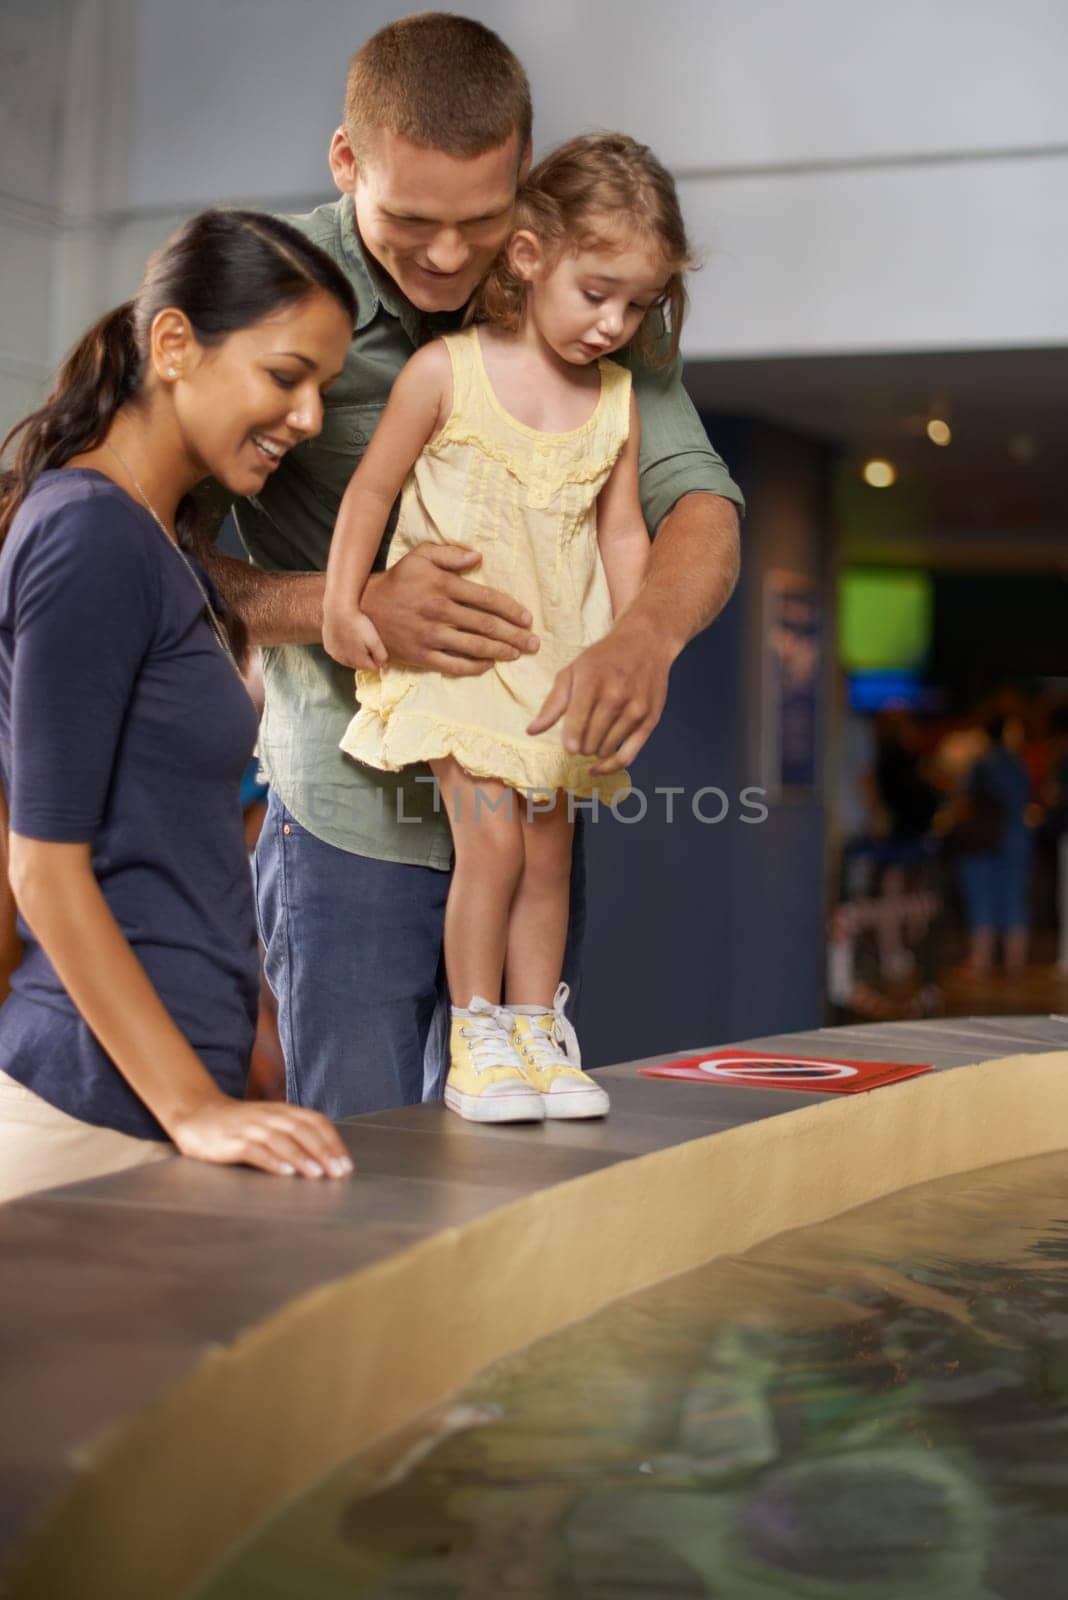 Happy family, little girl and aquarium with water for sightseeing, travel or tour at the zoo. Mother, father and child or kid looking at sea creature, fish or explore exhibit for bonding or holiday by YuriArcurs